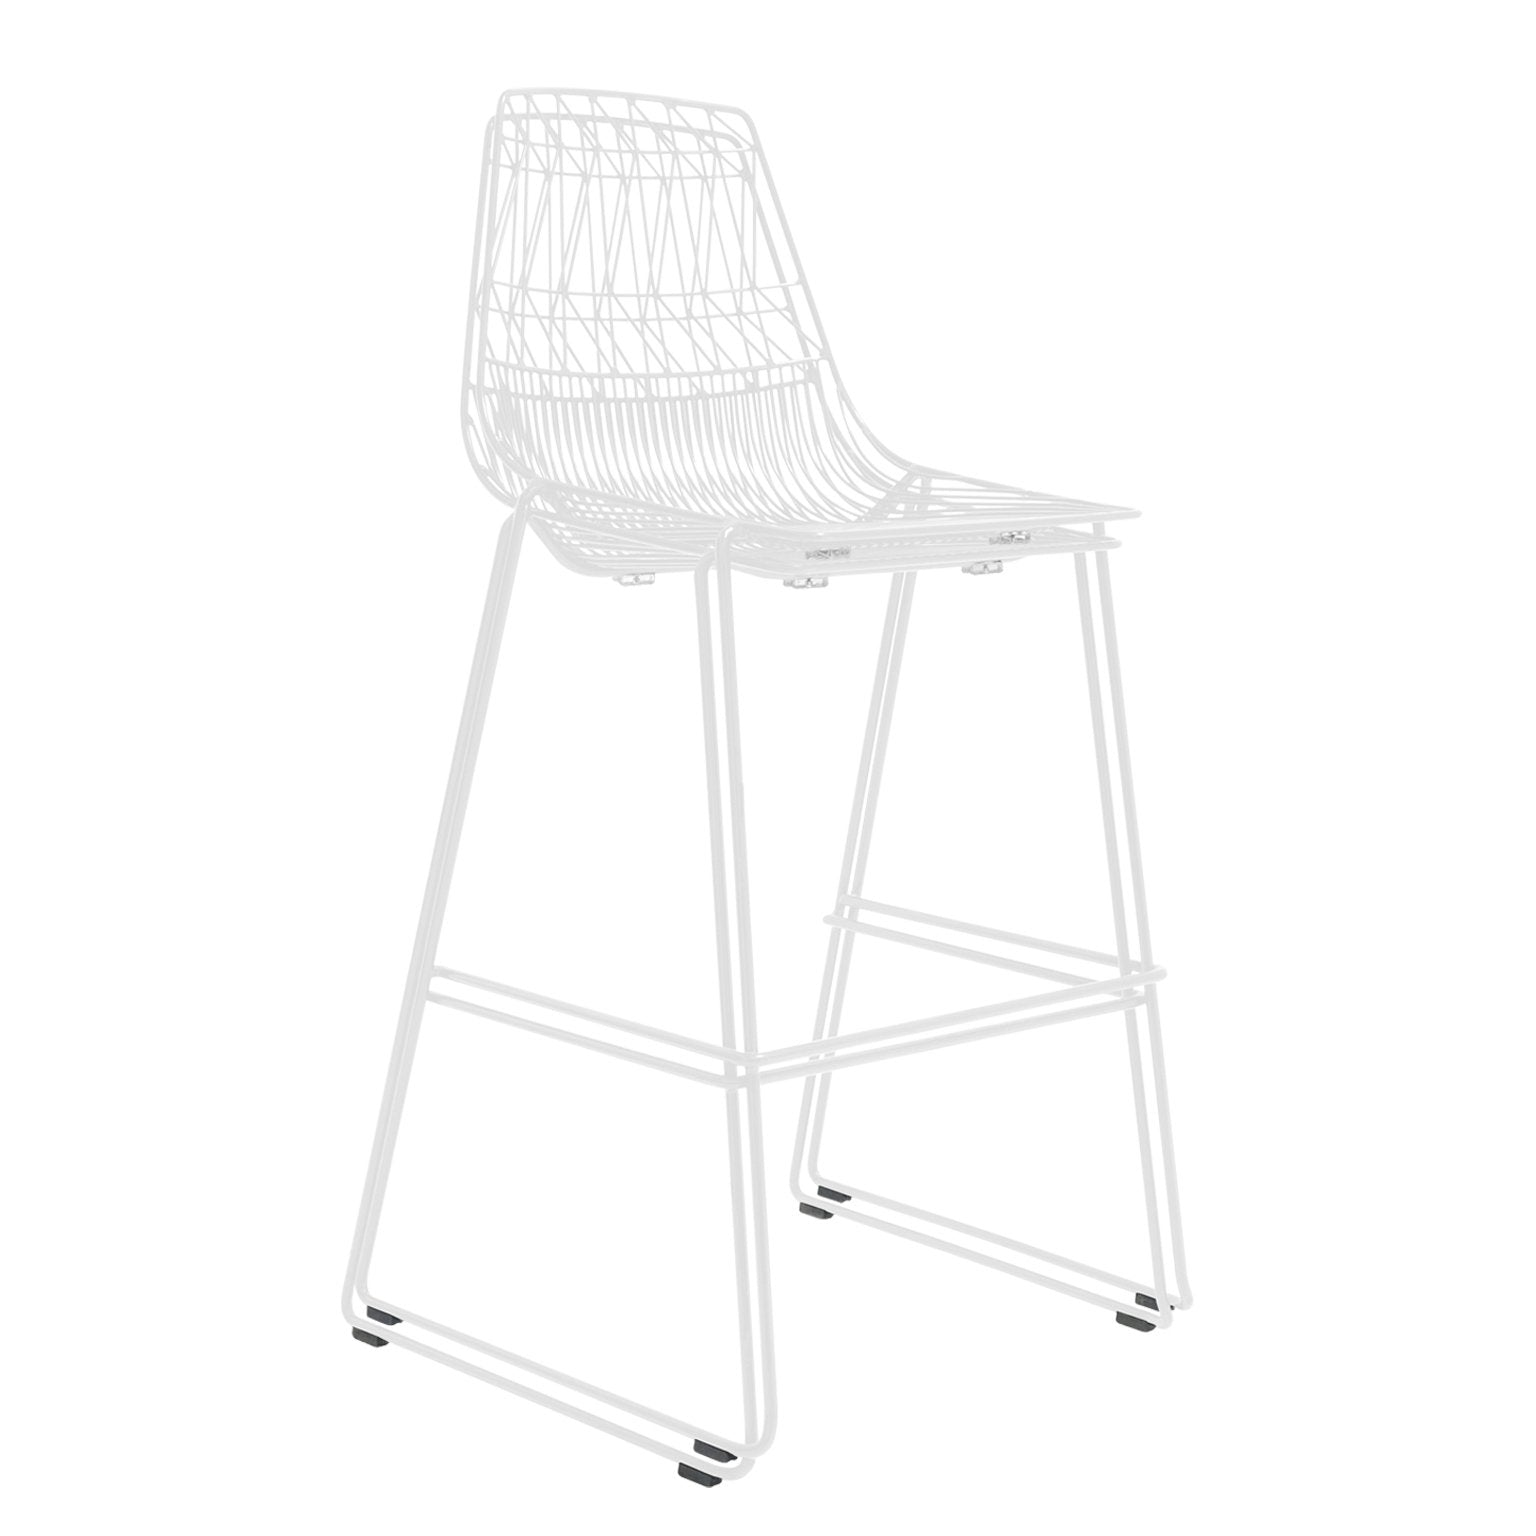 Lucy Stool / Stacking